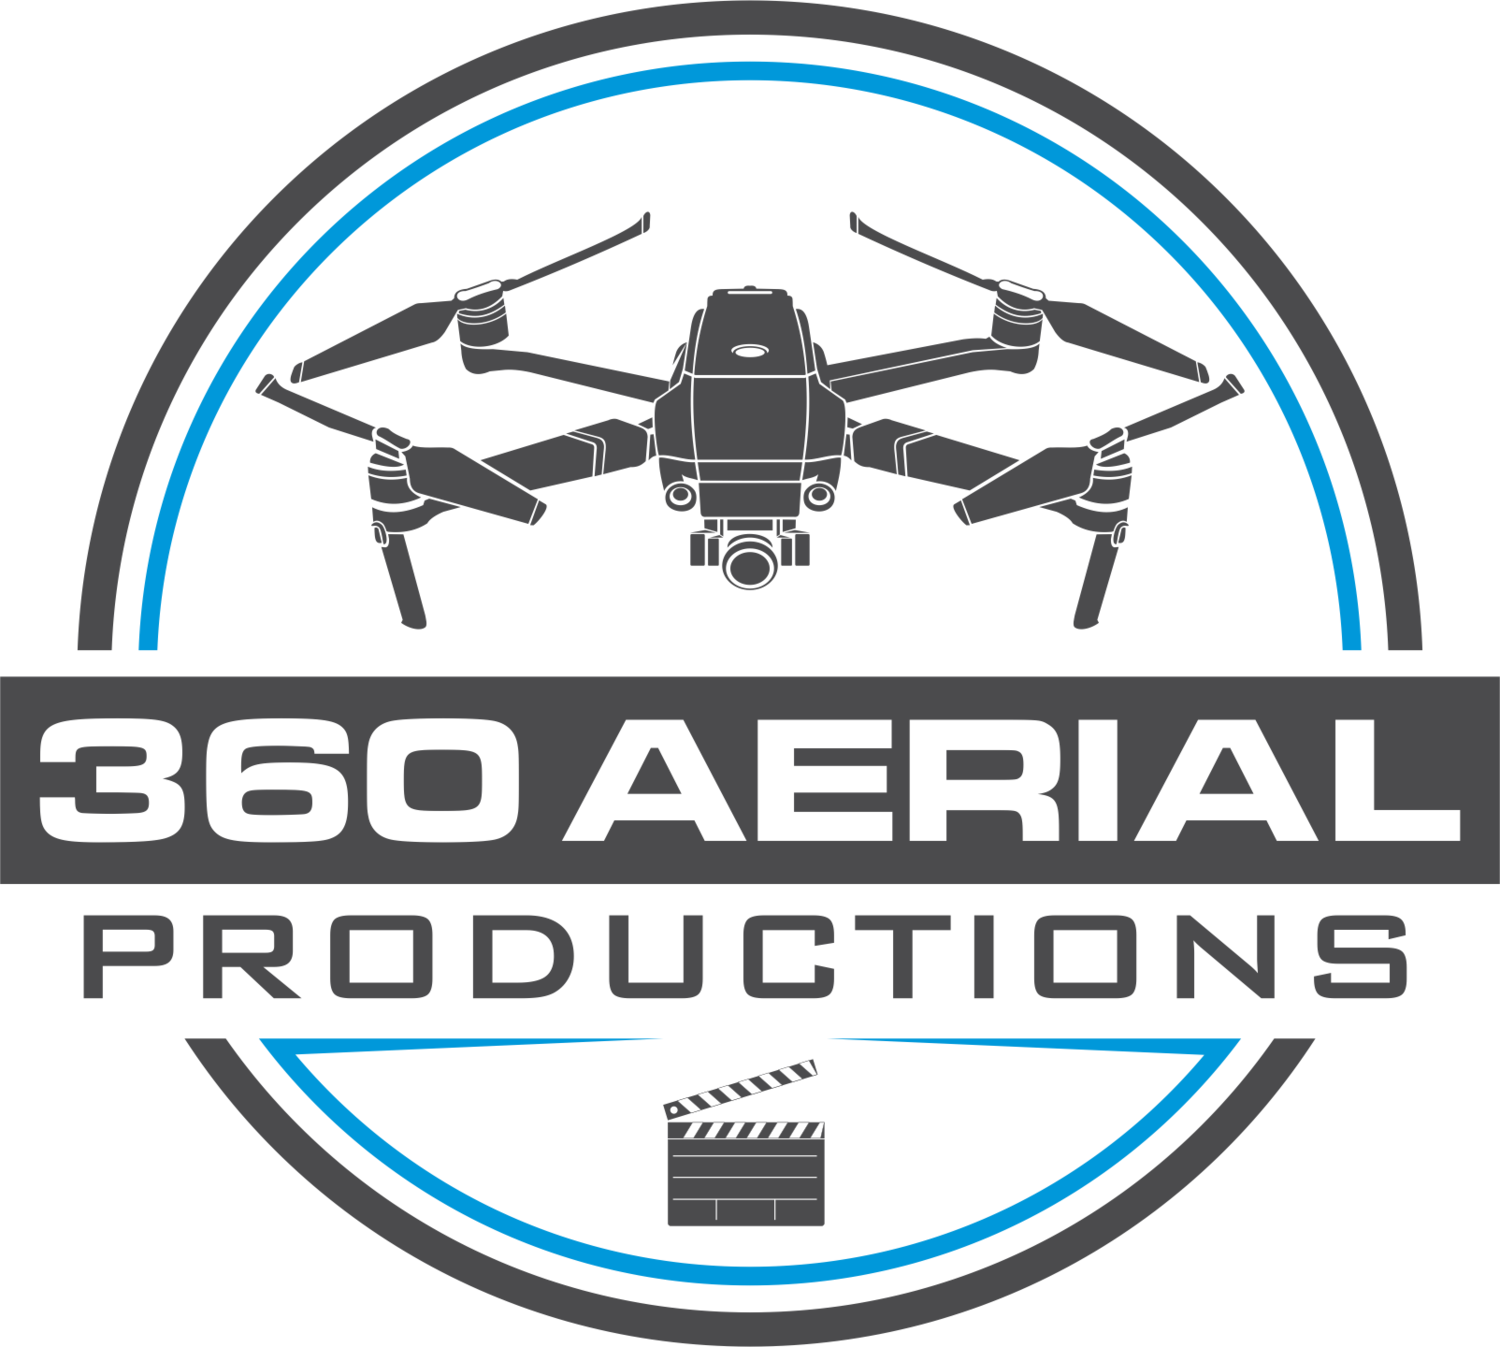 360 Aerial Productions